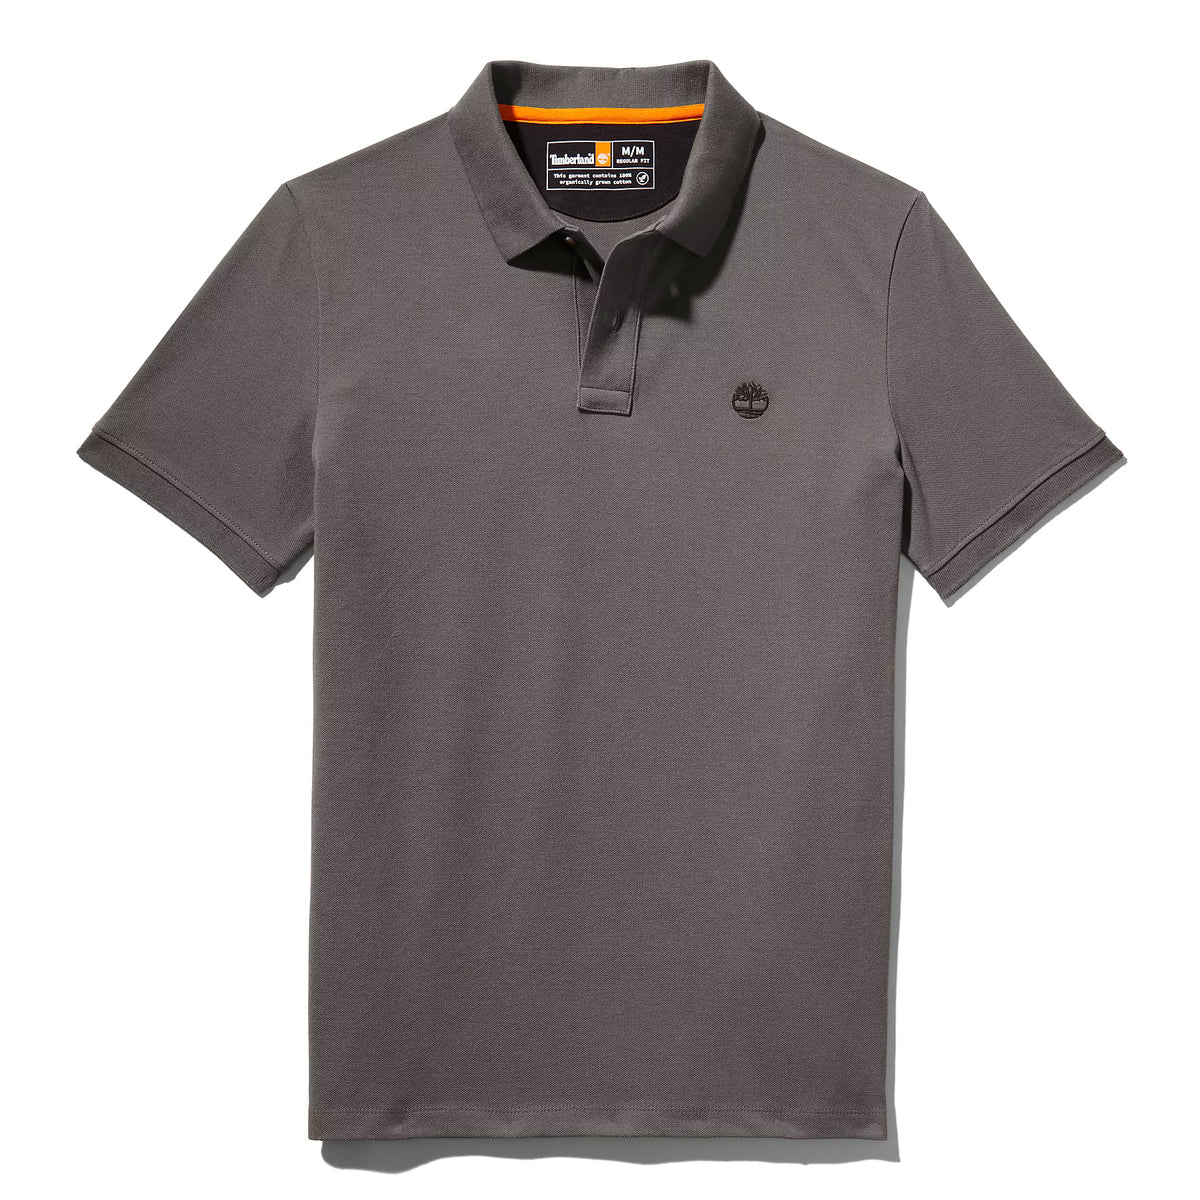 Timberland Mens Millers River Pique Polo T-Shirt - Short Sleeved, 01, Tb0A26N4, #colour_Castlerock